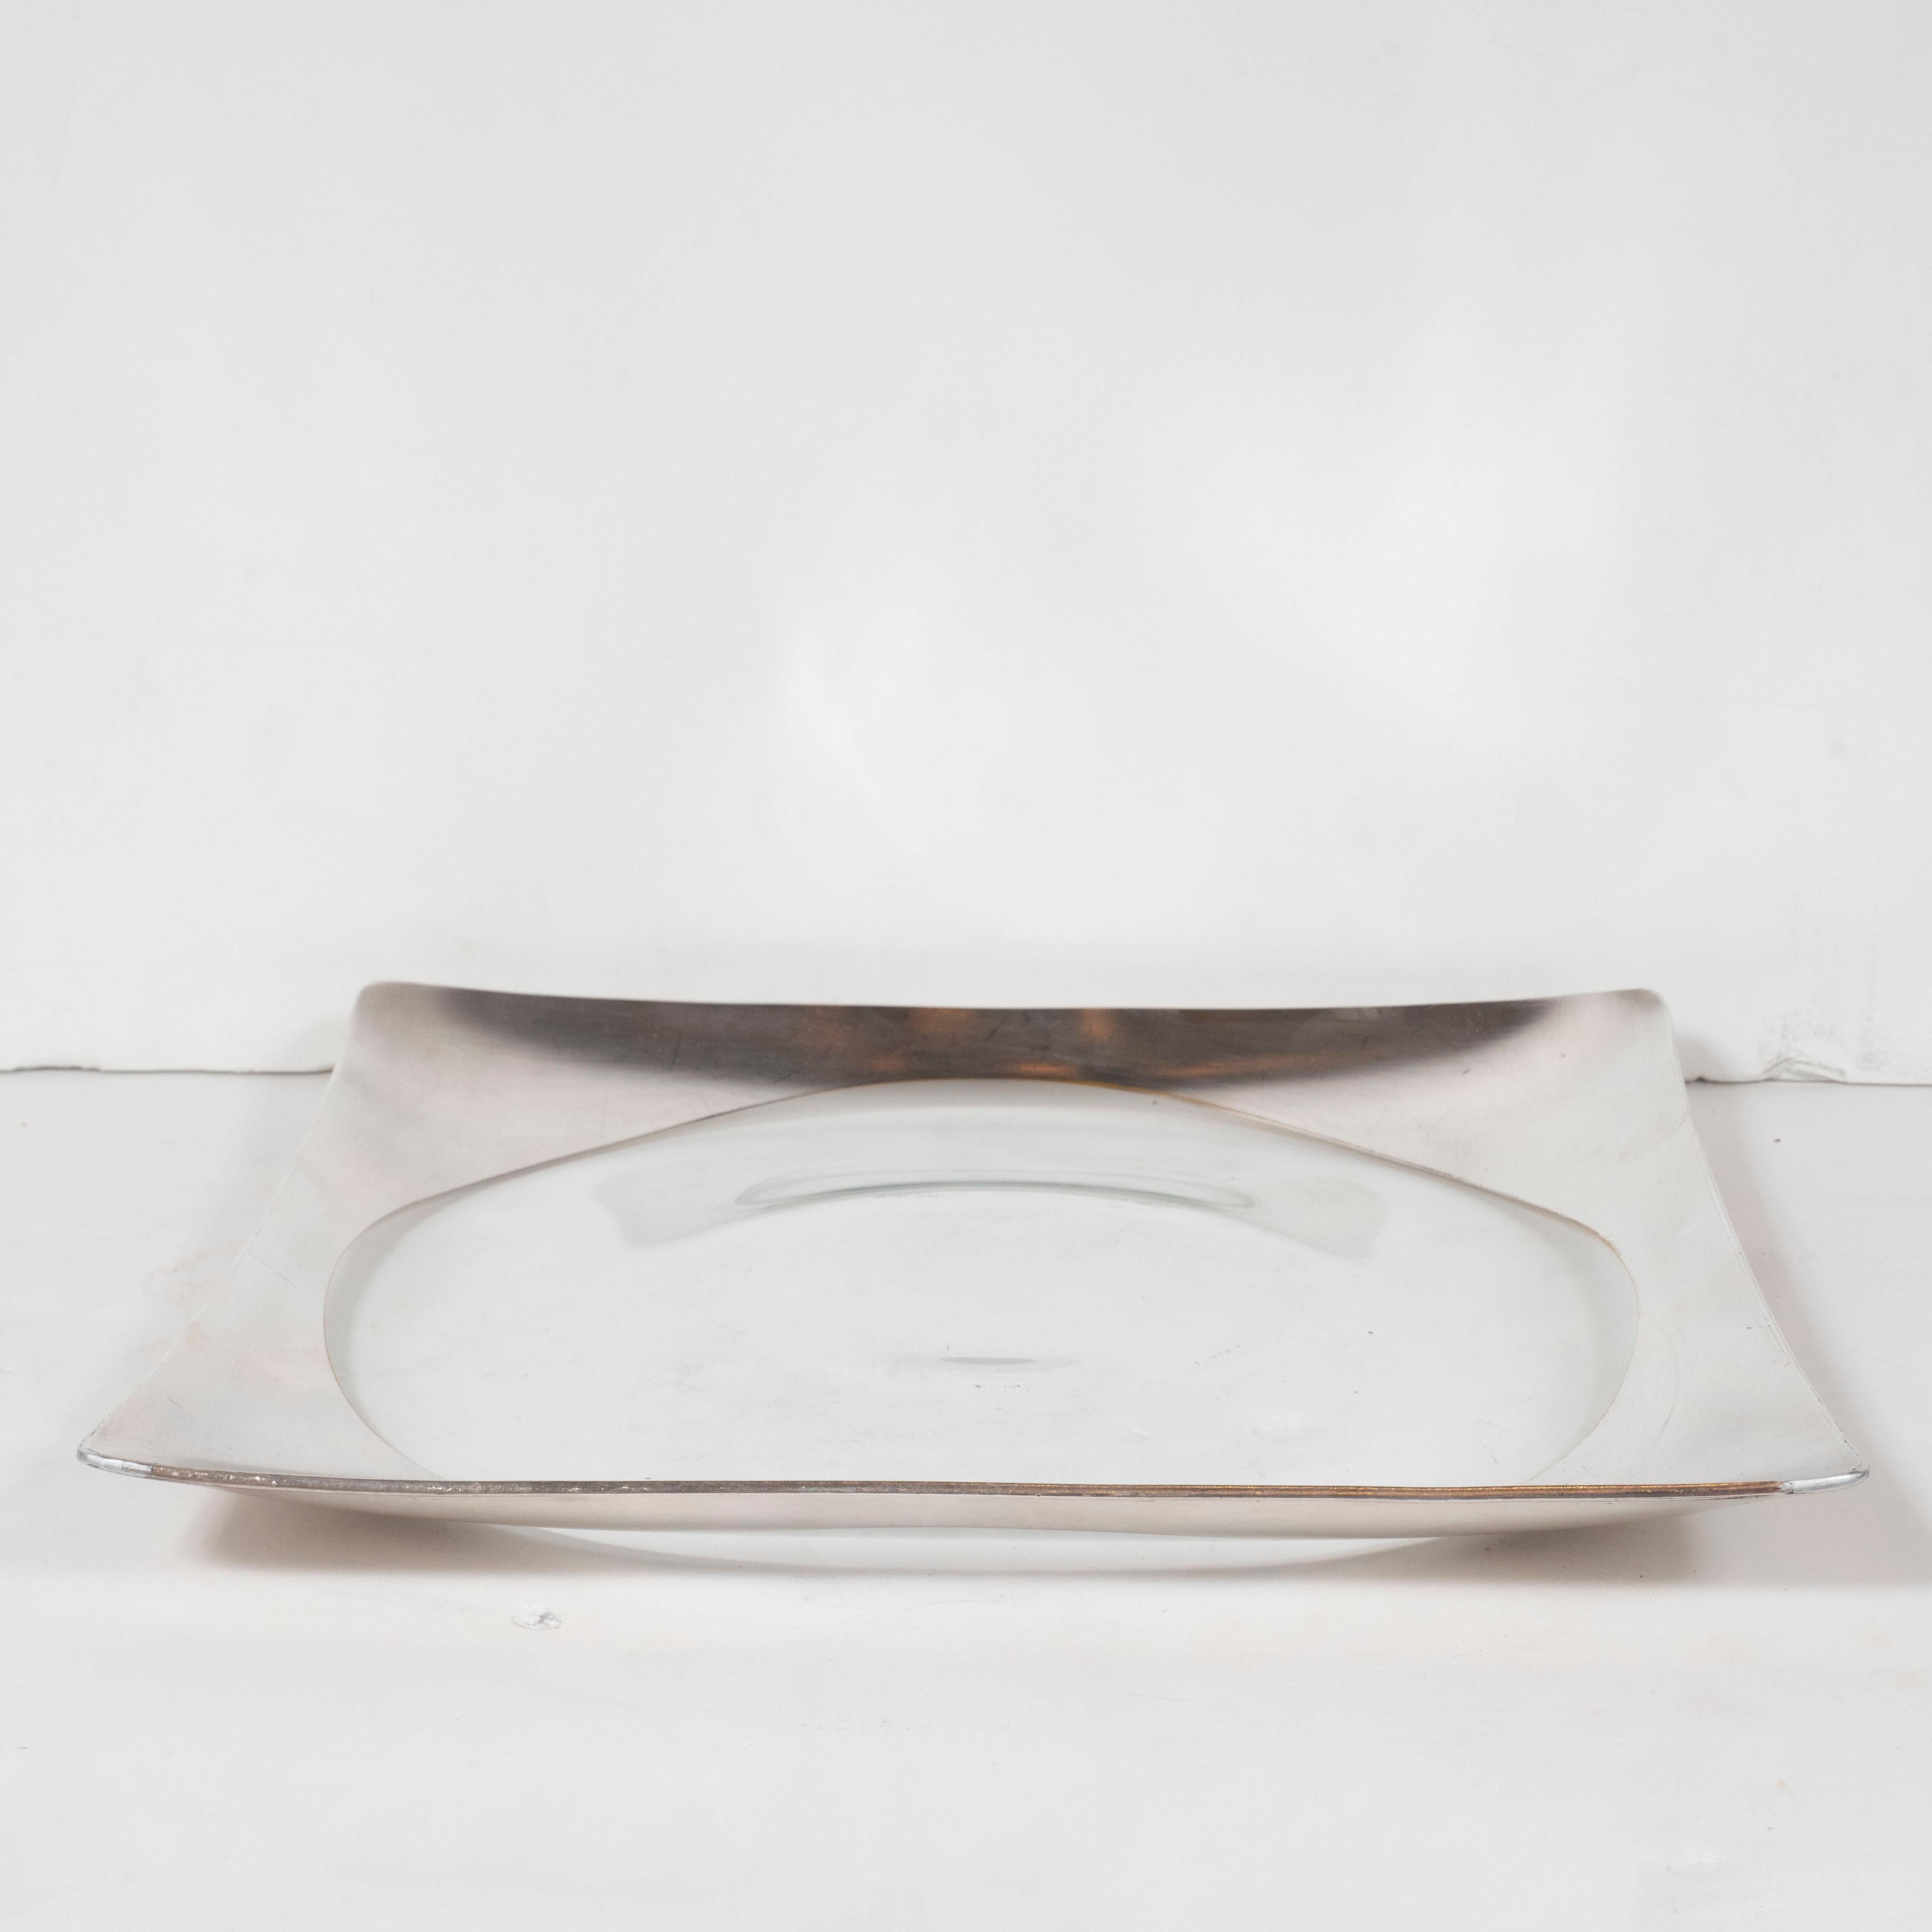 This stunning Mid-Century Modern tray was realized by the esteemed American designer Dorothy Thorpe circa 1950. It features a sterling silver inlay around the perimeter with a circular translucent glass cut out in the center. It would be perfect for